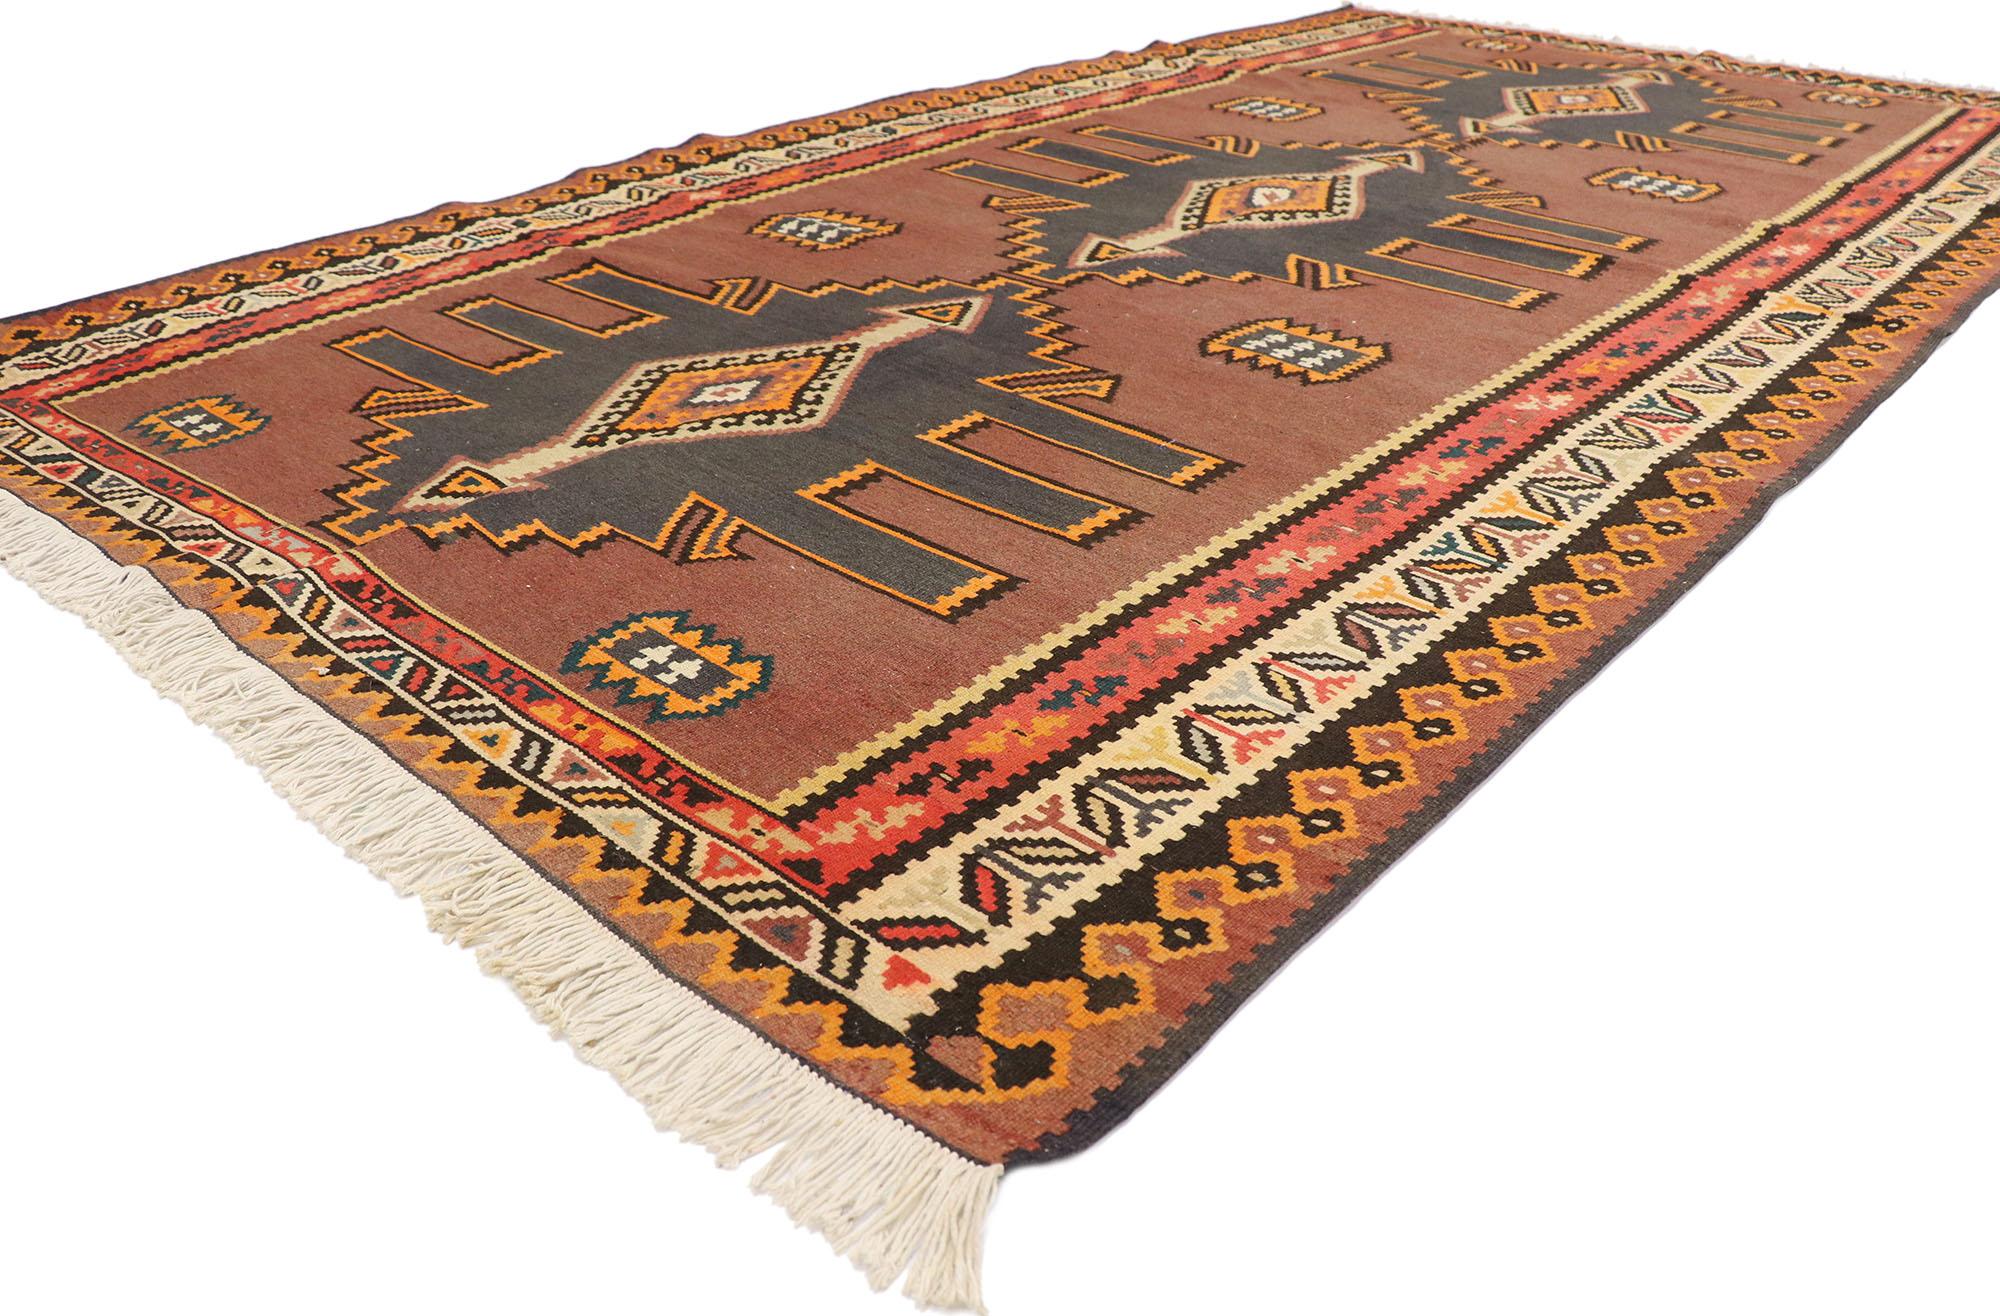 77956 Vintage Turkish Kilim Rug with Tribal Style 05'06 x 10'00. Full of tiny details and a bold expressive design combined with with warm earthy color palette and tribal style, this hand-woven wool vintage Turkish kilim rug is a captivating vision